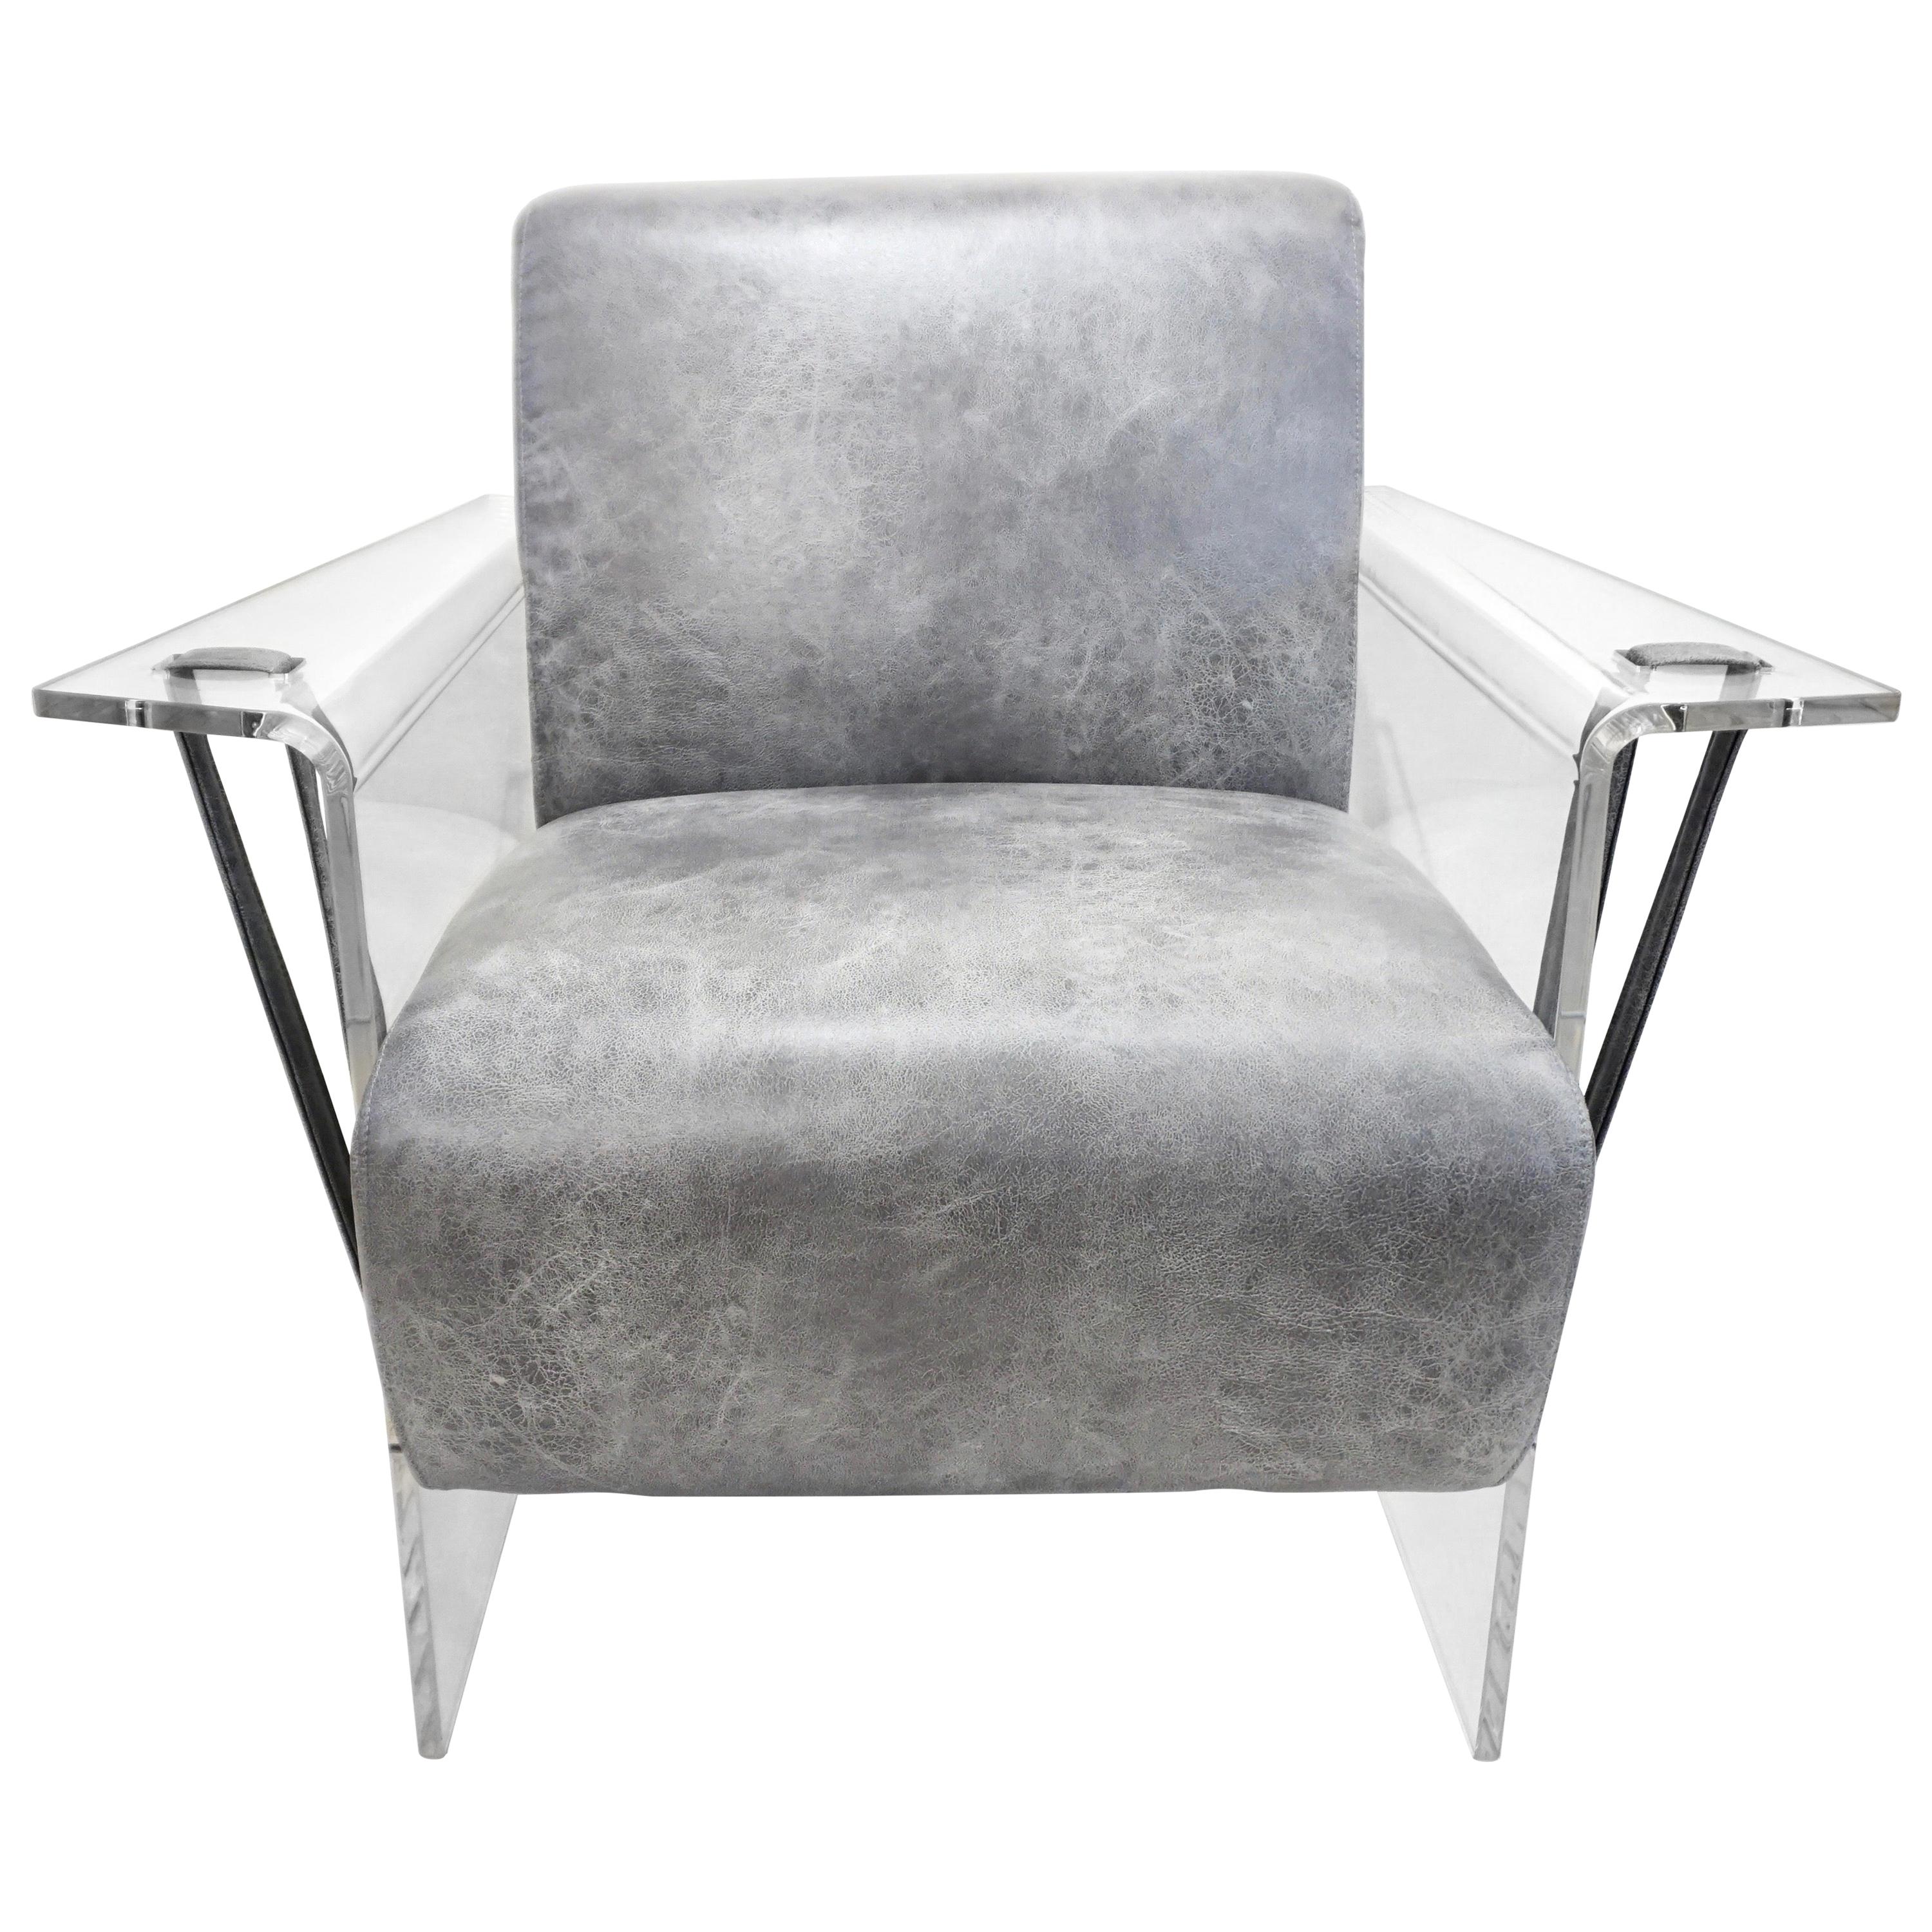 Bespoke Modernist Lucite Acrylic Lounge Armchair in Light Gray Faux Leather